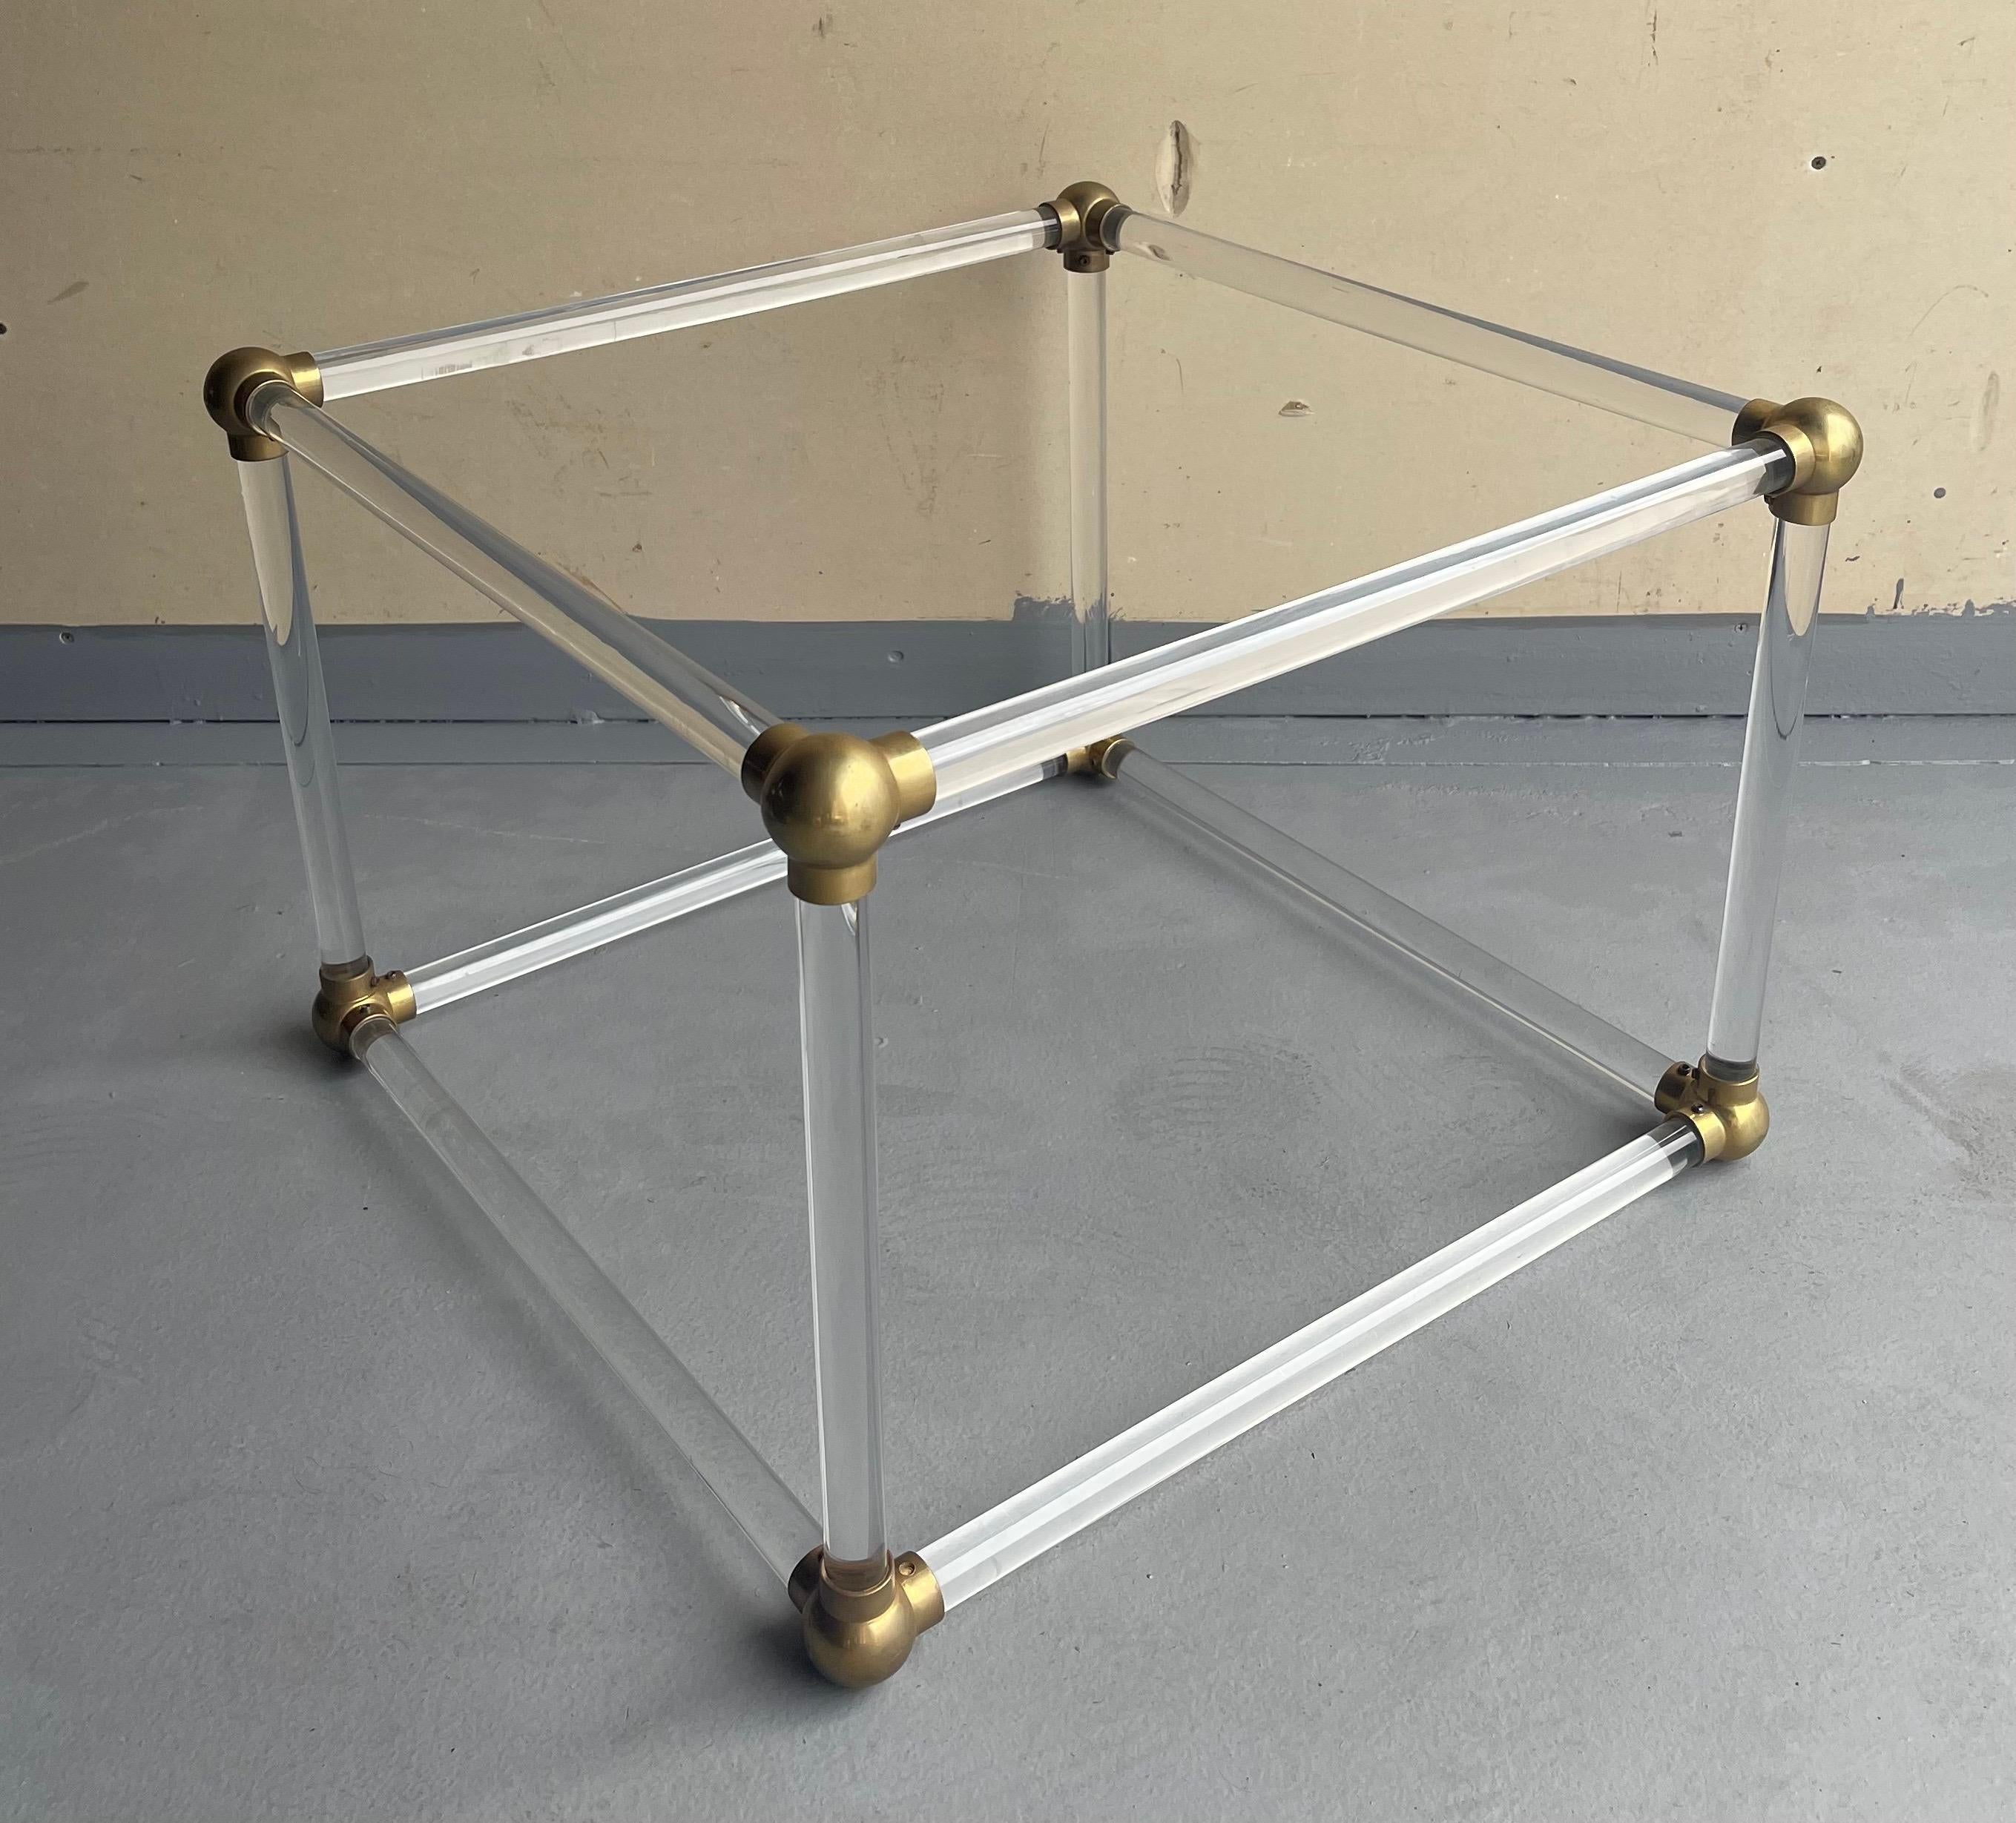 Unique mid-century lucite cube and brass connector coffee table base in the style of Charles Hollis Jones, circa 1970s. The tubular lucite poles and brass connectors have been freshly polished and it makes a very unique and stunning piece. It can be